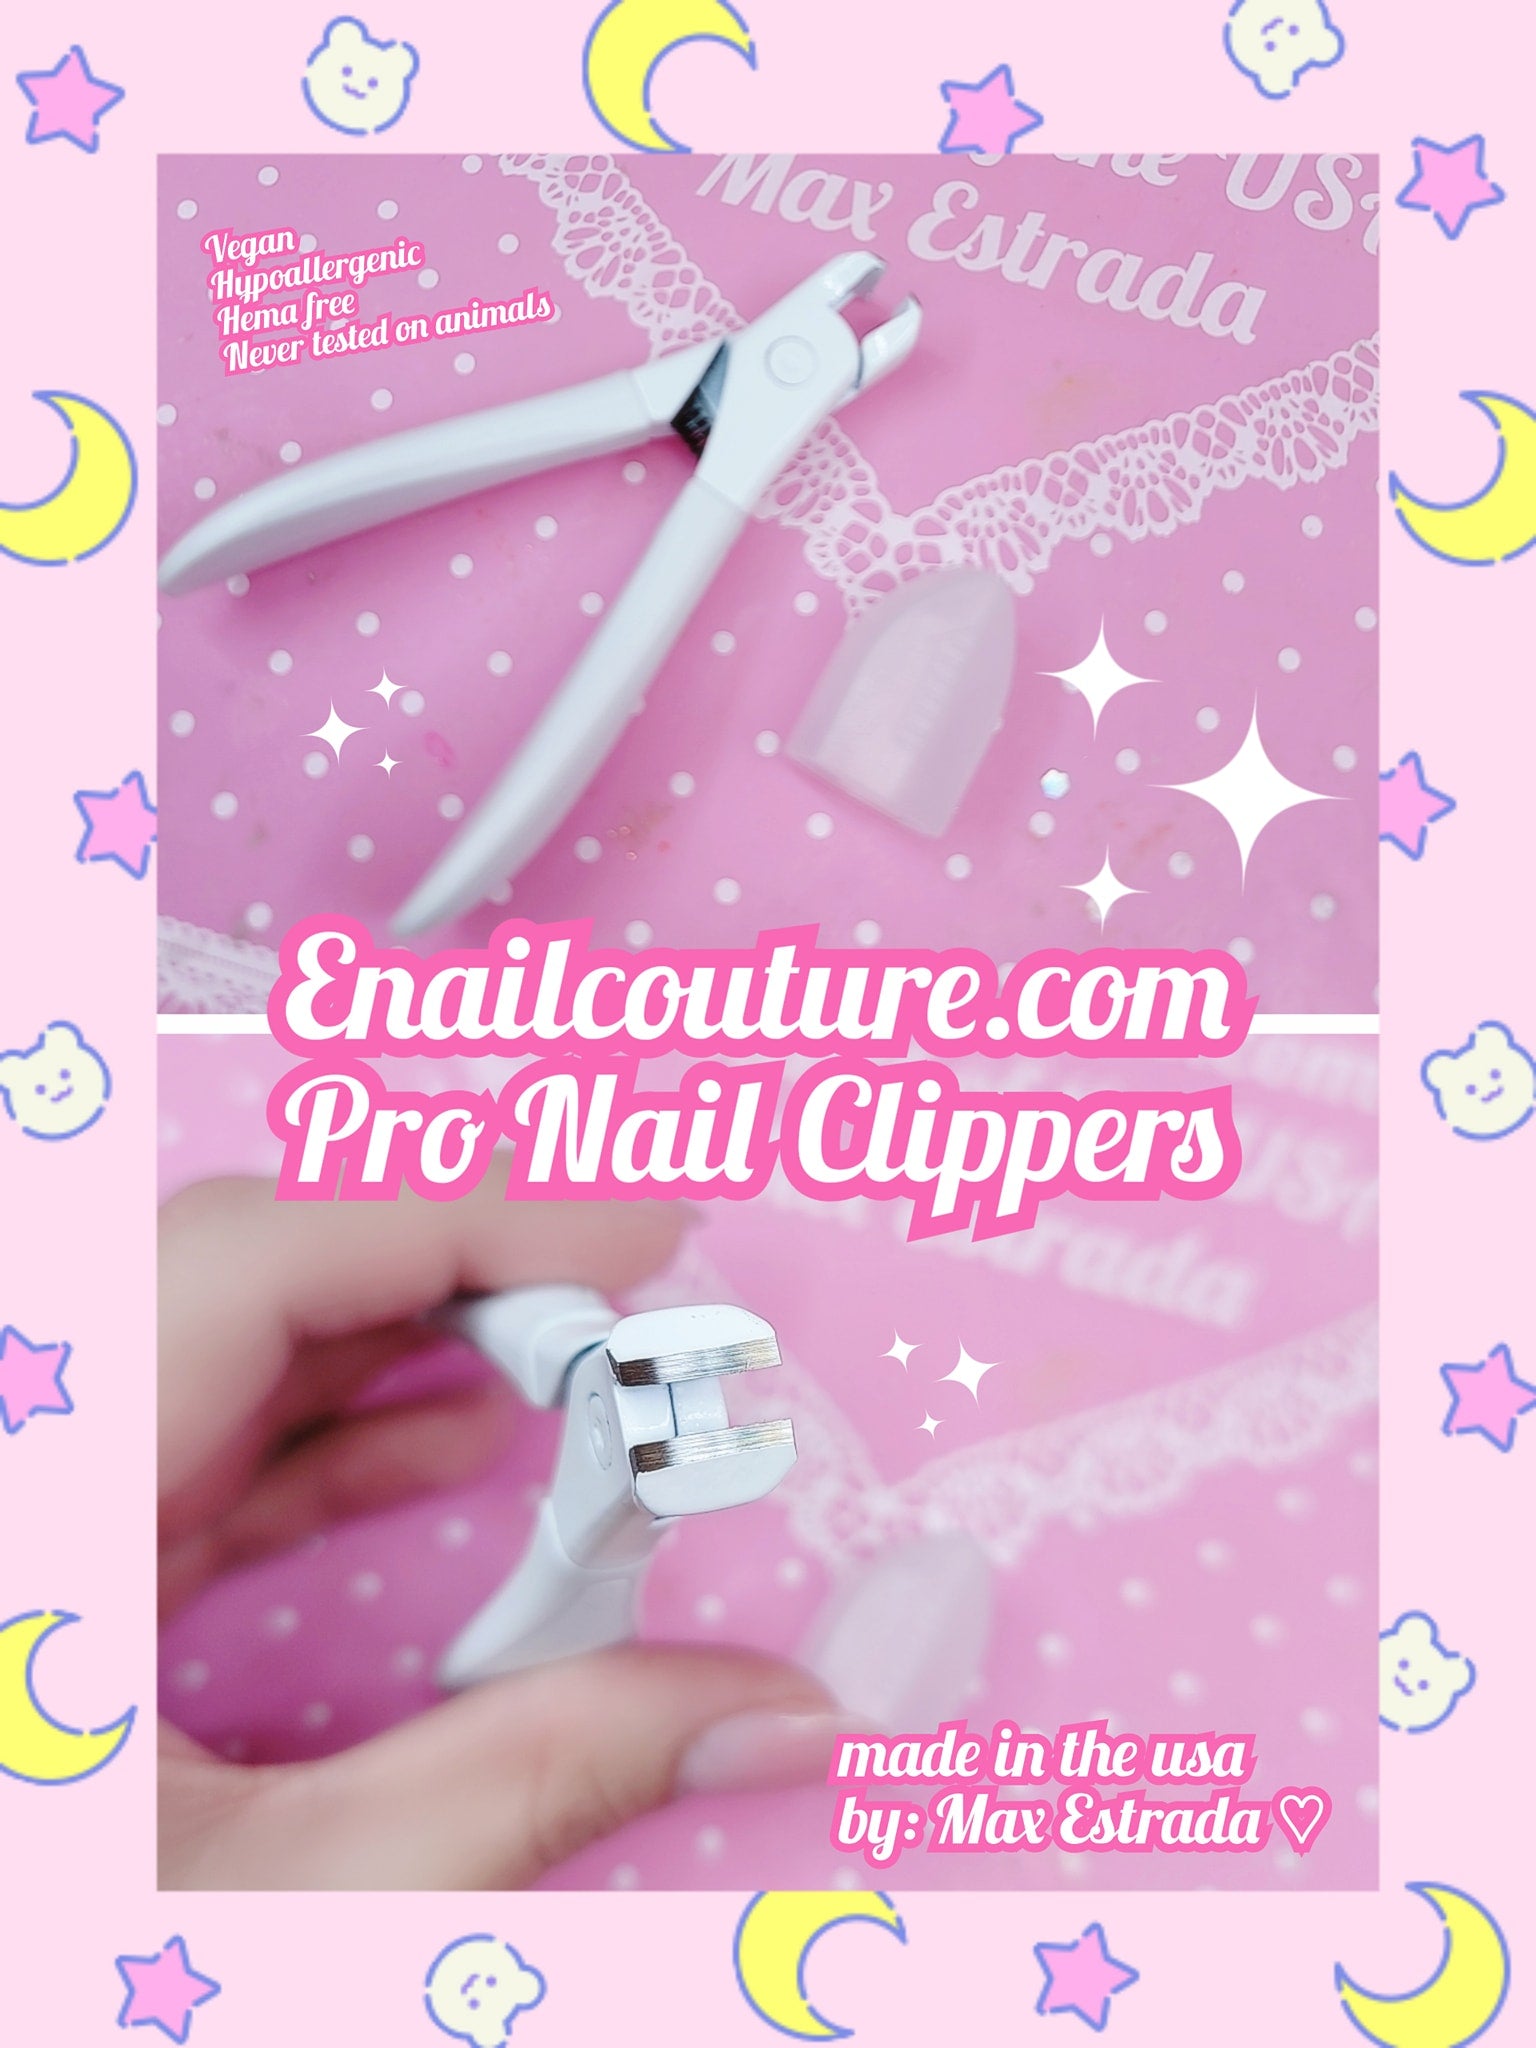 PRO nail clippers! (Fingernail & Toenail Clippers,White Toenail Clippers for Thick Toenails,Ultra Sharp Sturdy Nail Clippers)